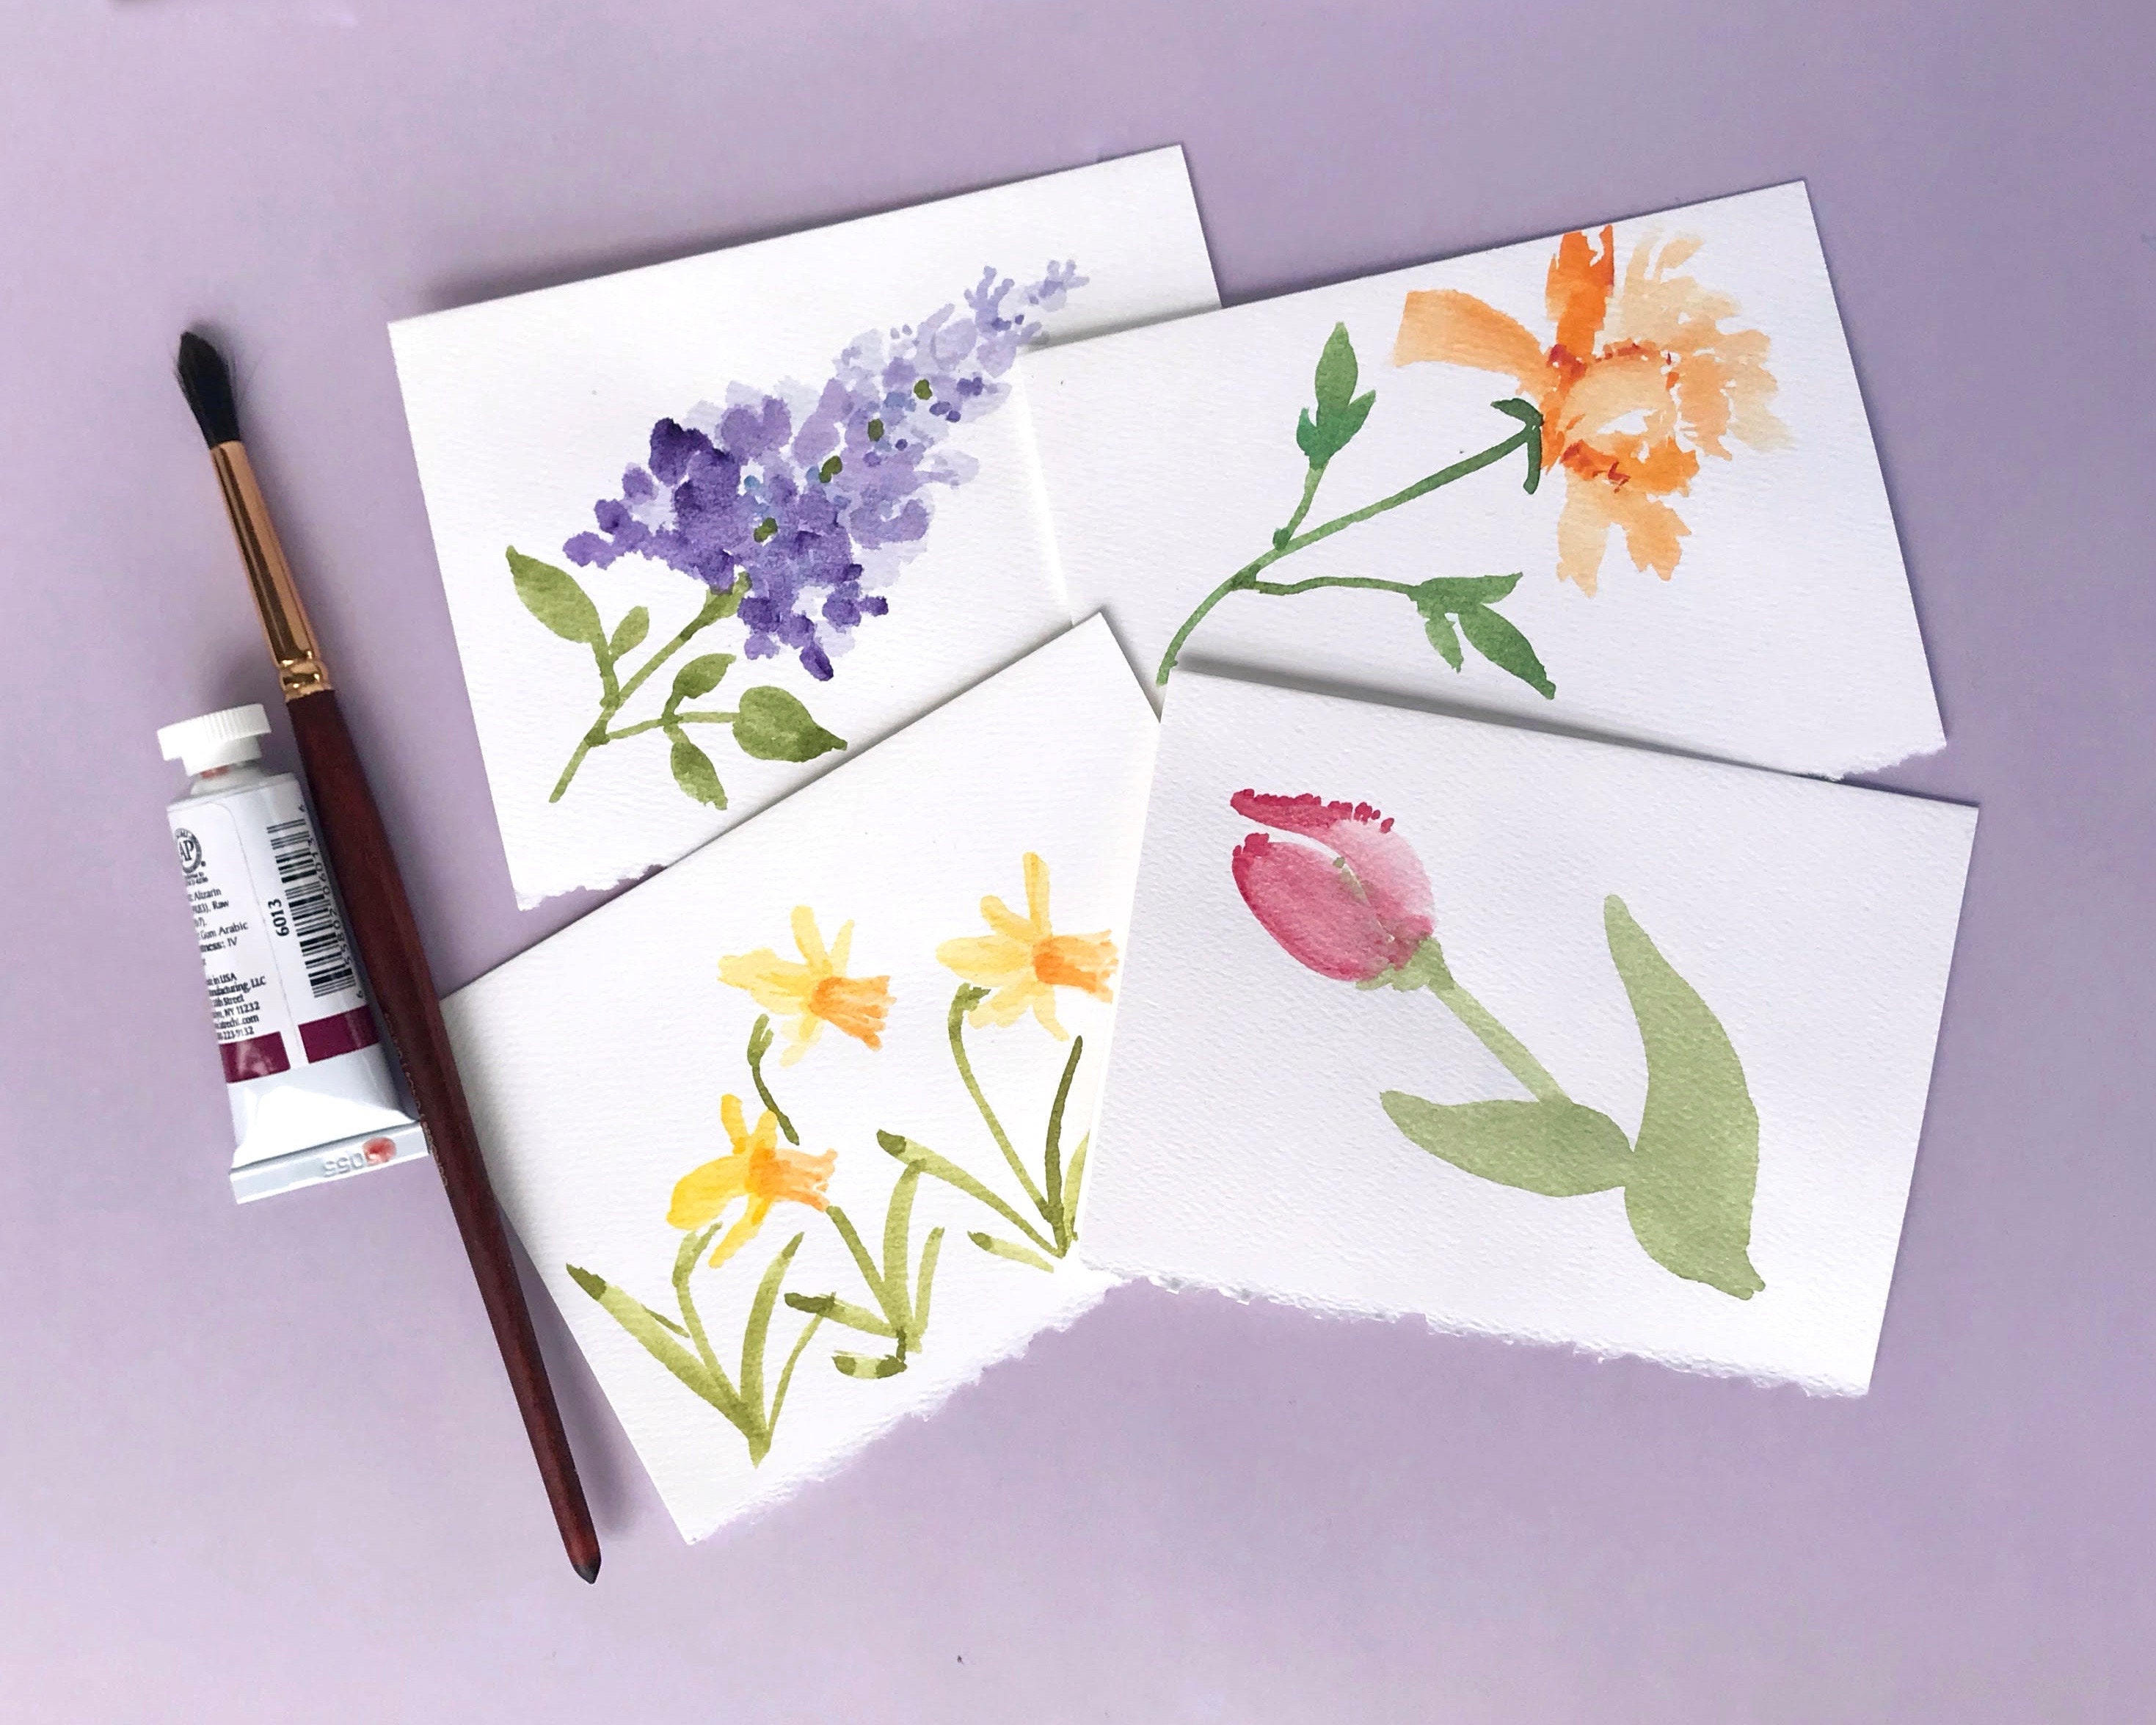 Details about   Assorted Flower Garden  Note Cards Set of Four 5 x 7  Watercolor Reproductions 2 